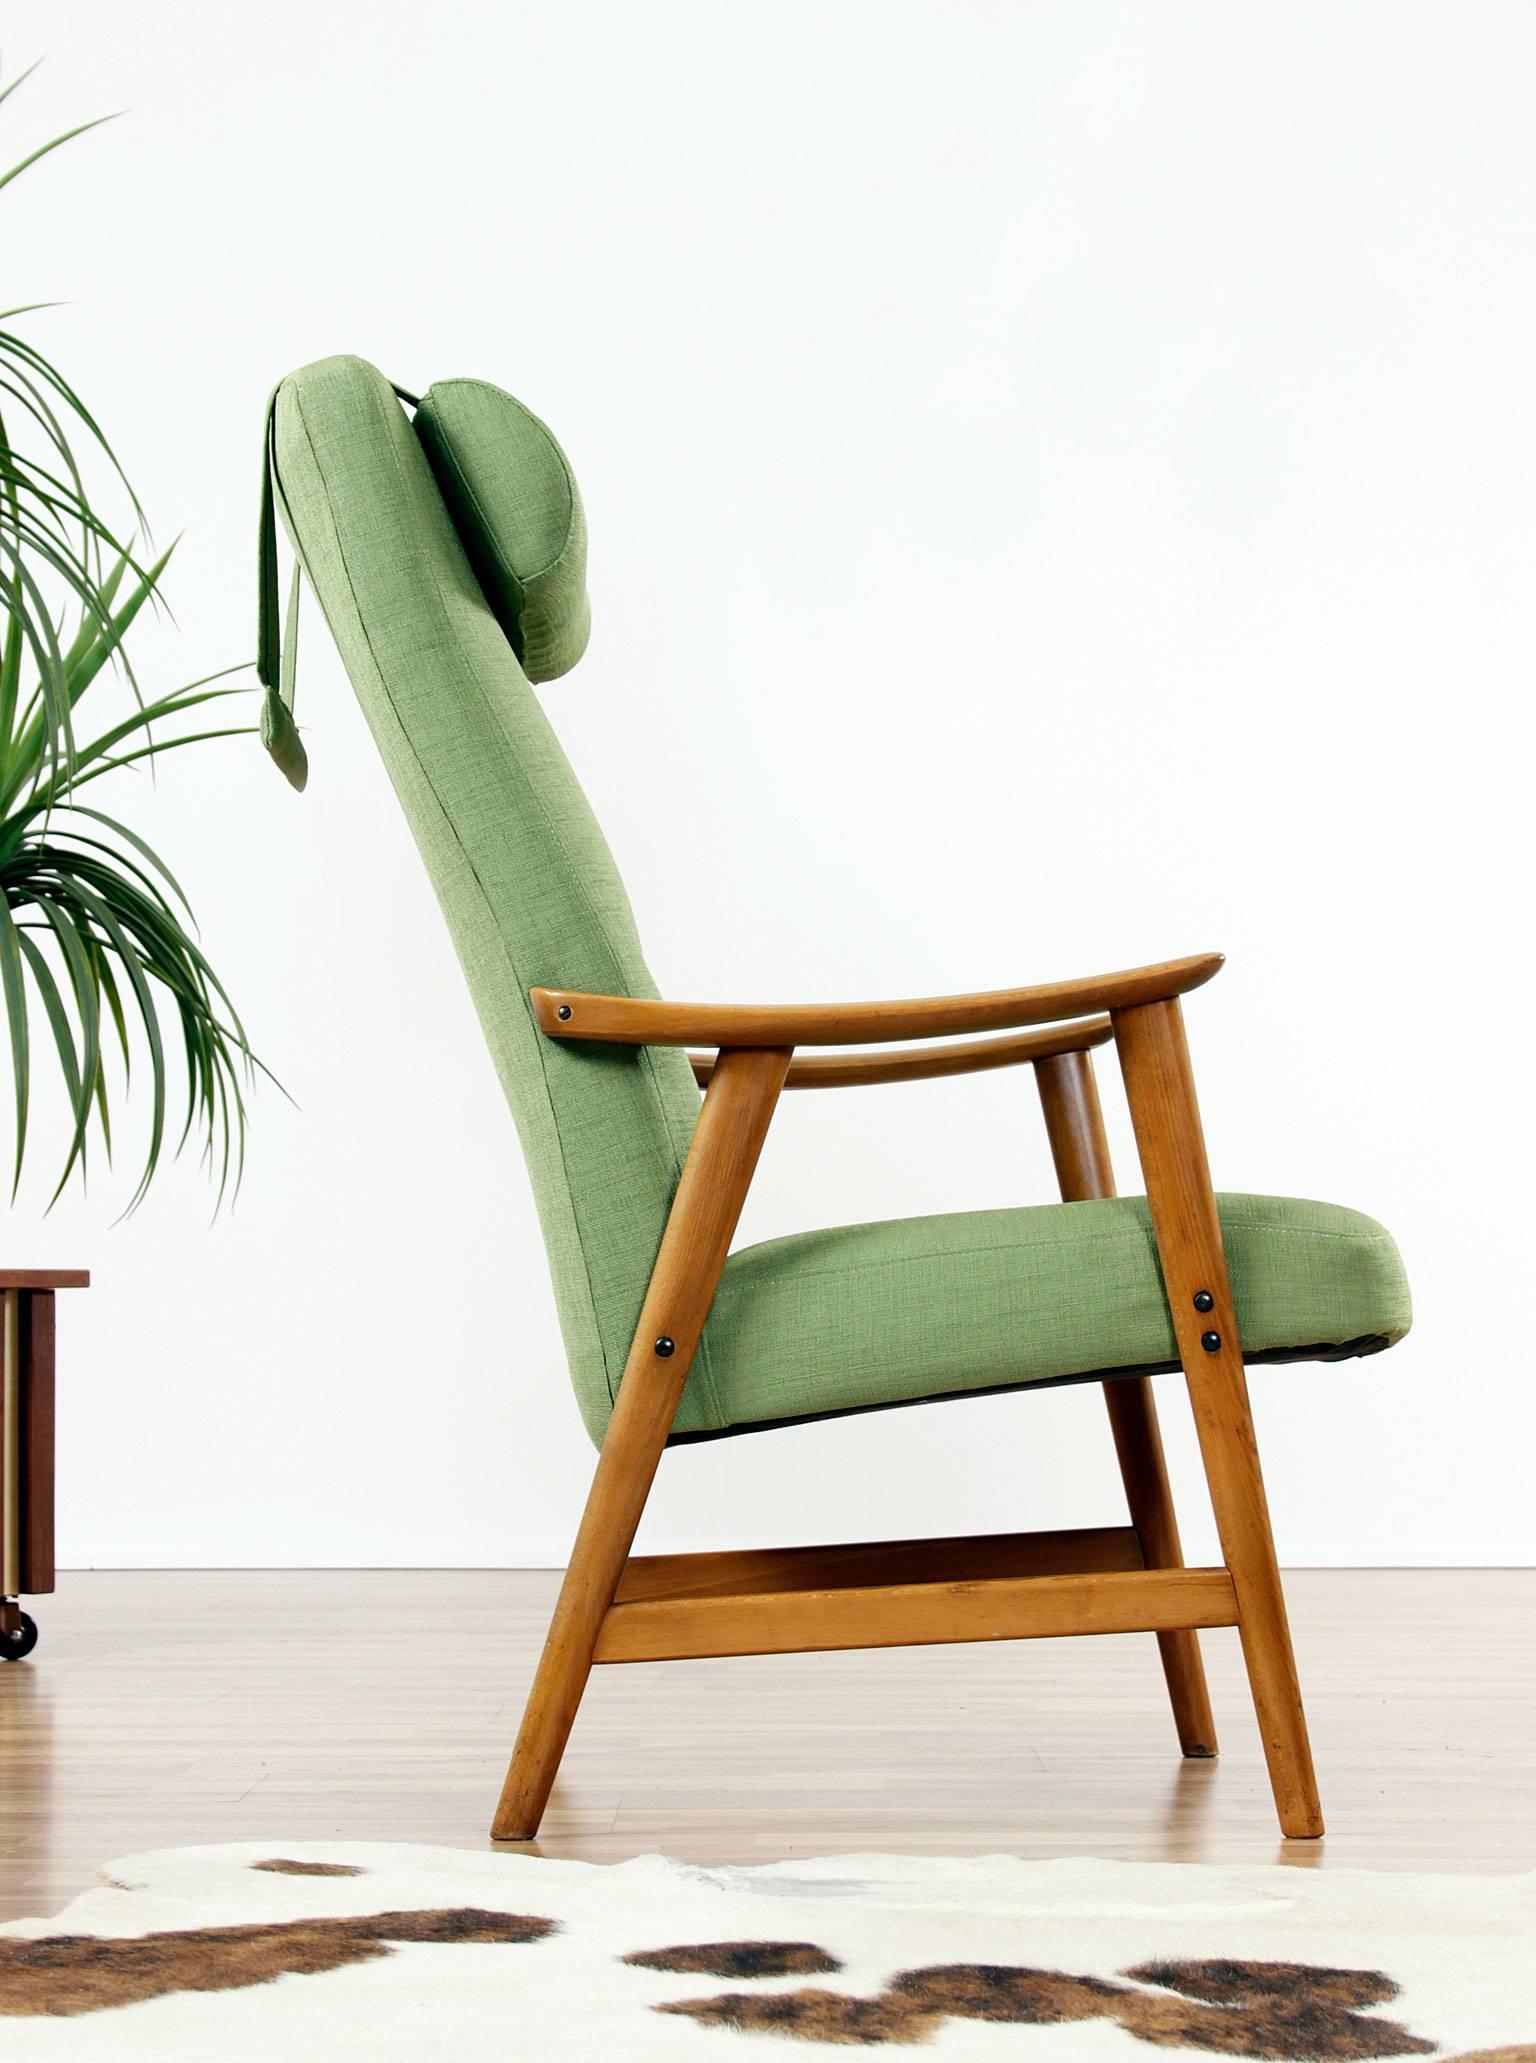 Restored Mid-Century Modern Dokka Mobler armchair. Solid beech wood frame is quintessentially Norwegian. The chair has been restored with new interior support webbing and new green upholstery. Ergonomic design with a contoured back and support